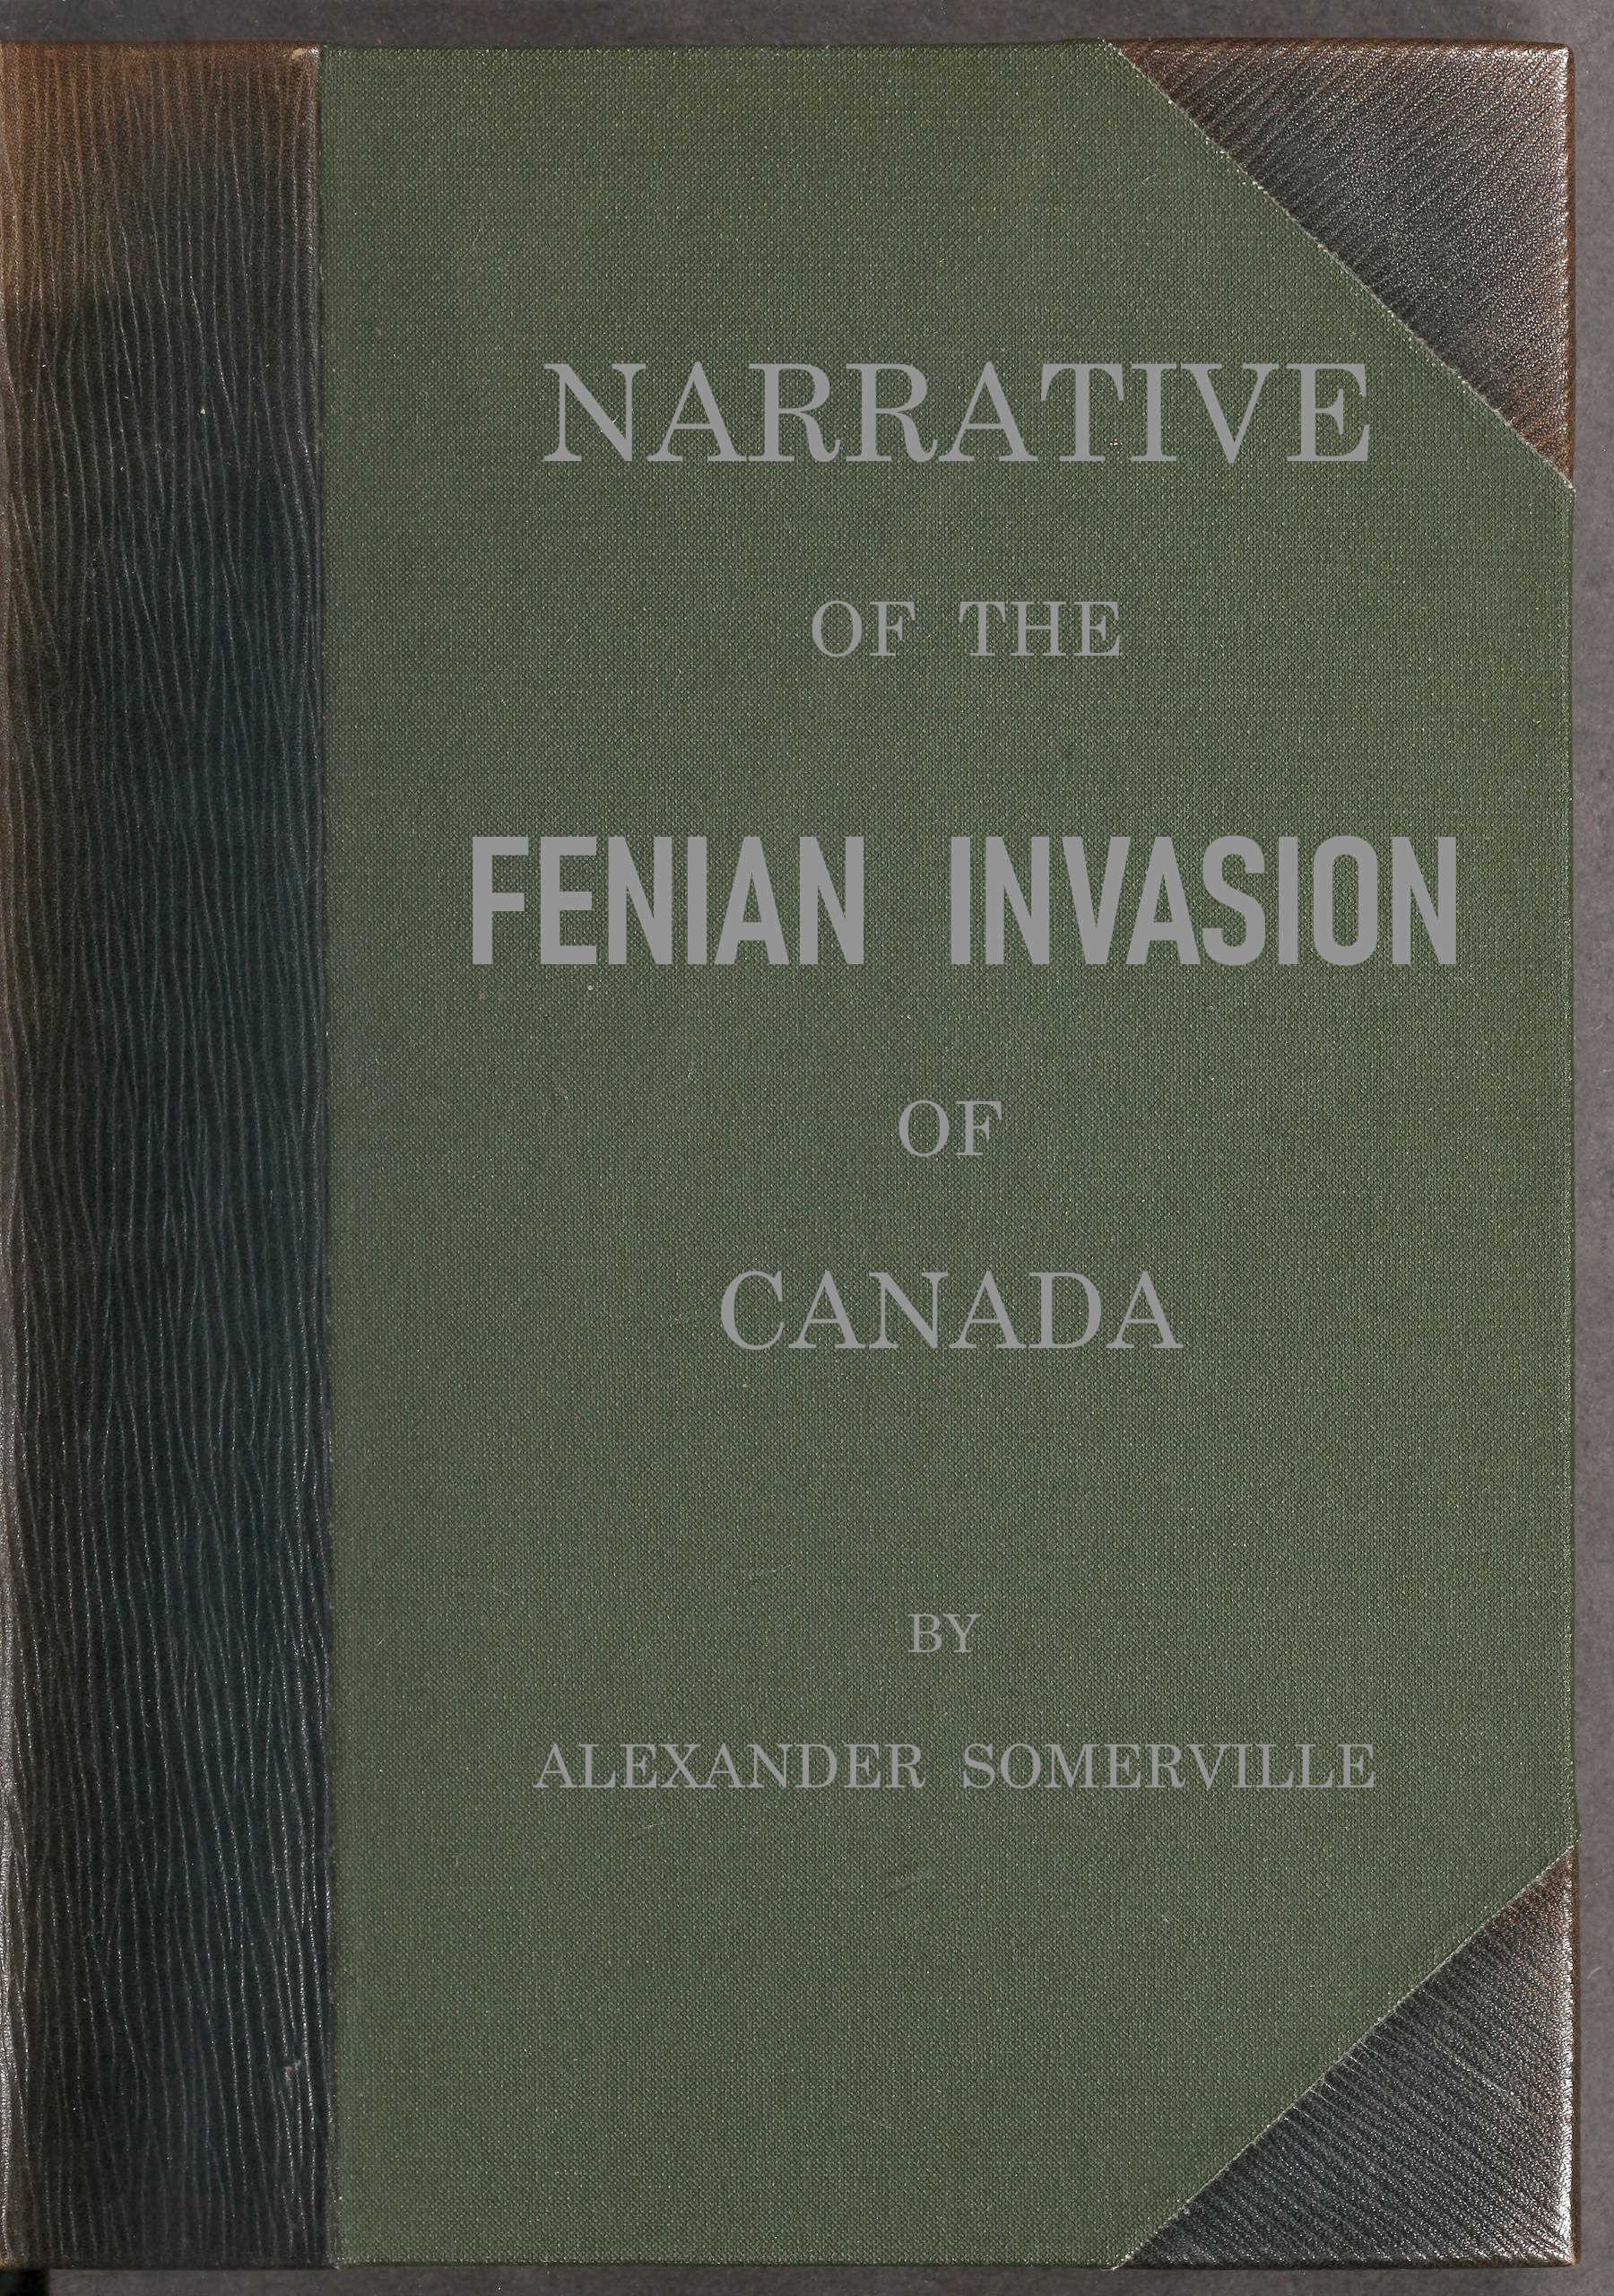 Narrative of the Fenian invasion of Canada